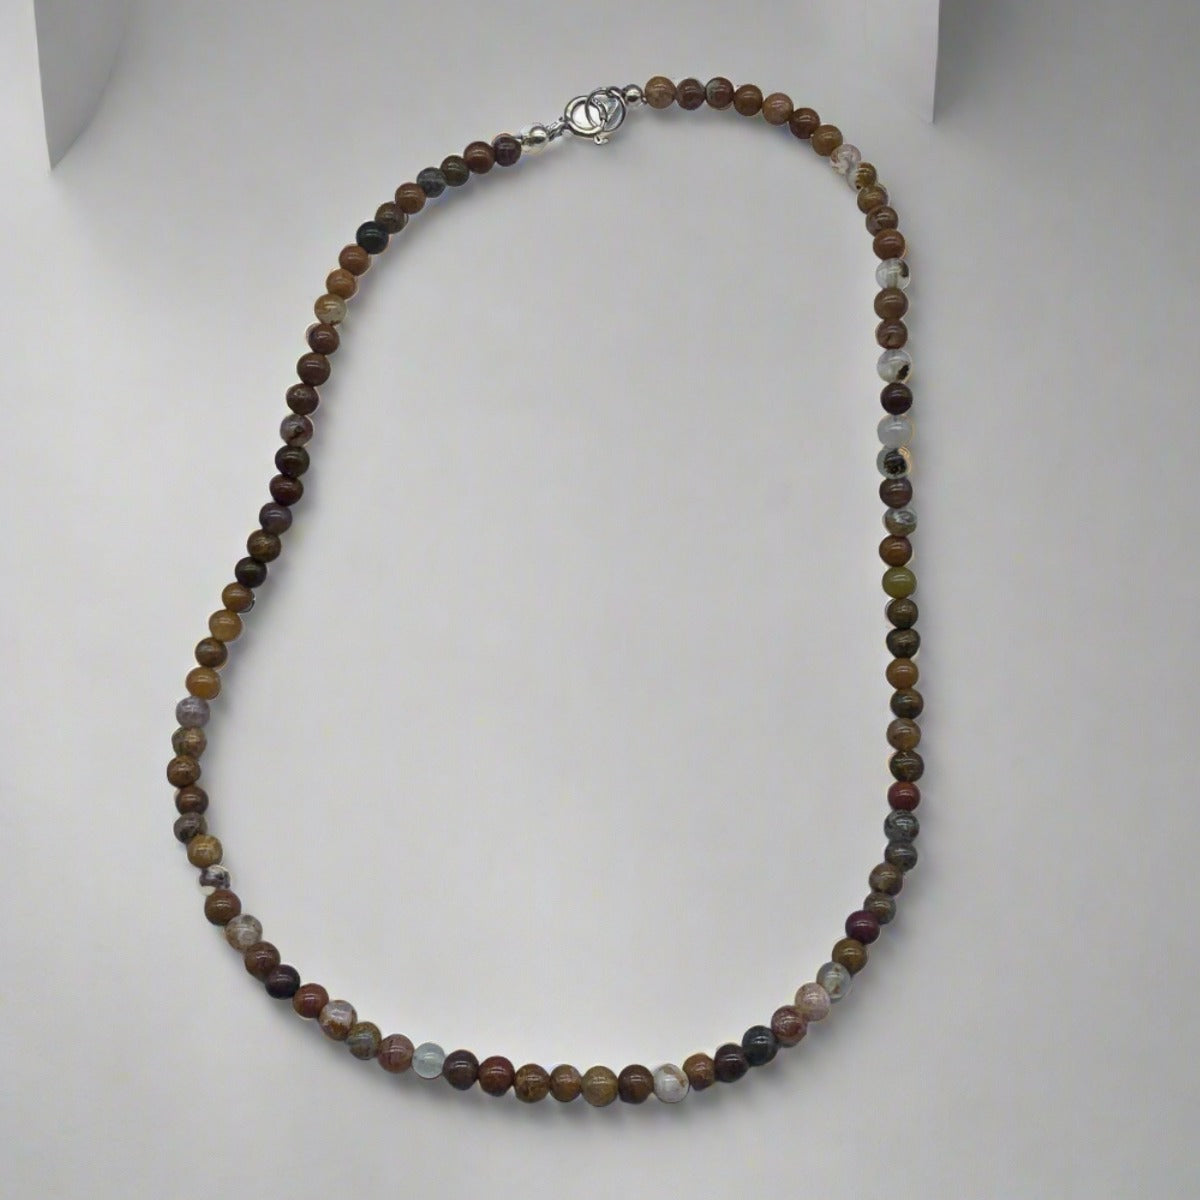 Agua Nueva Agate Necklace: A necklace featuring brown and beige hues with banded pattern stones and a sterling silver jump ring clasp